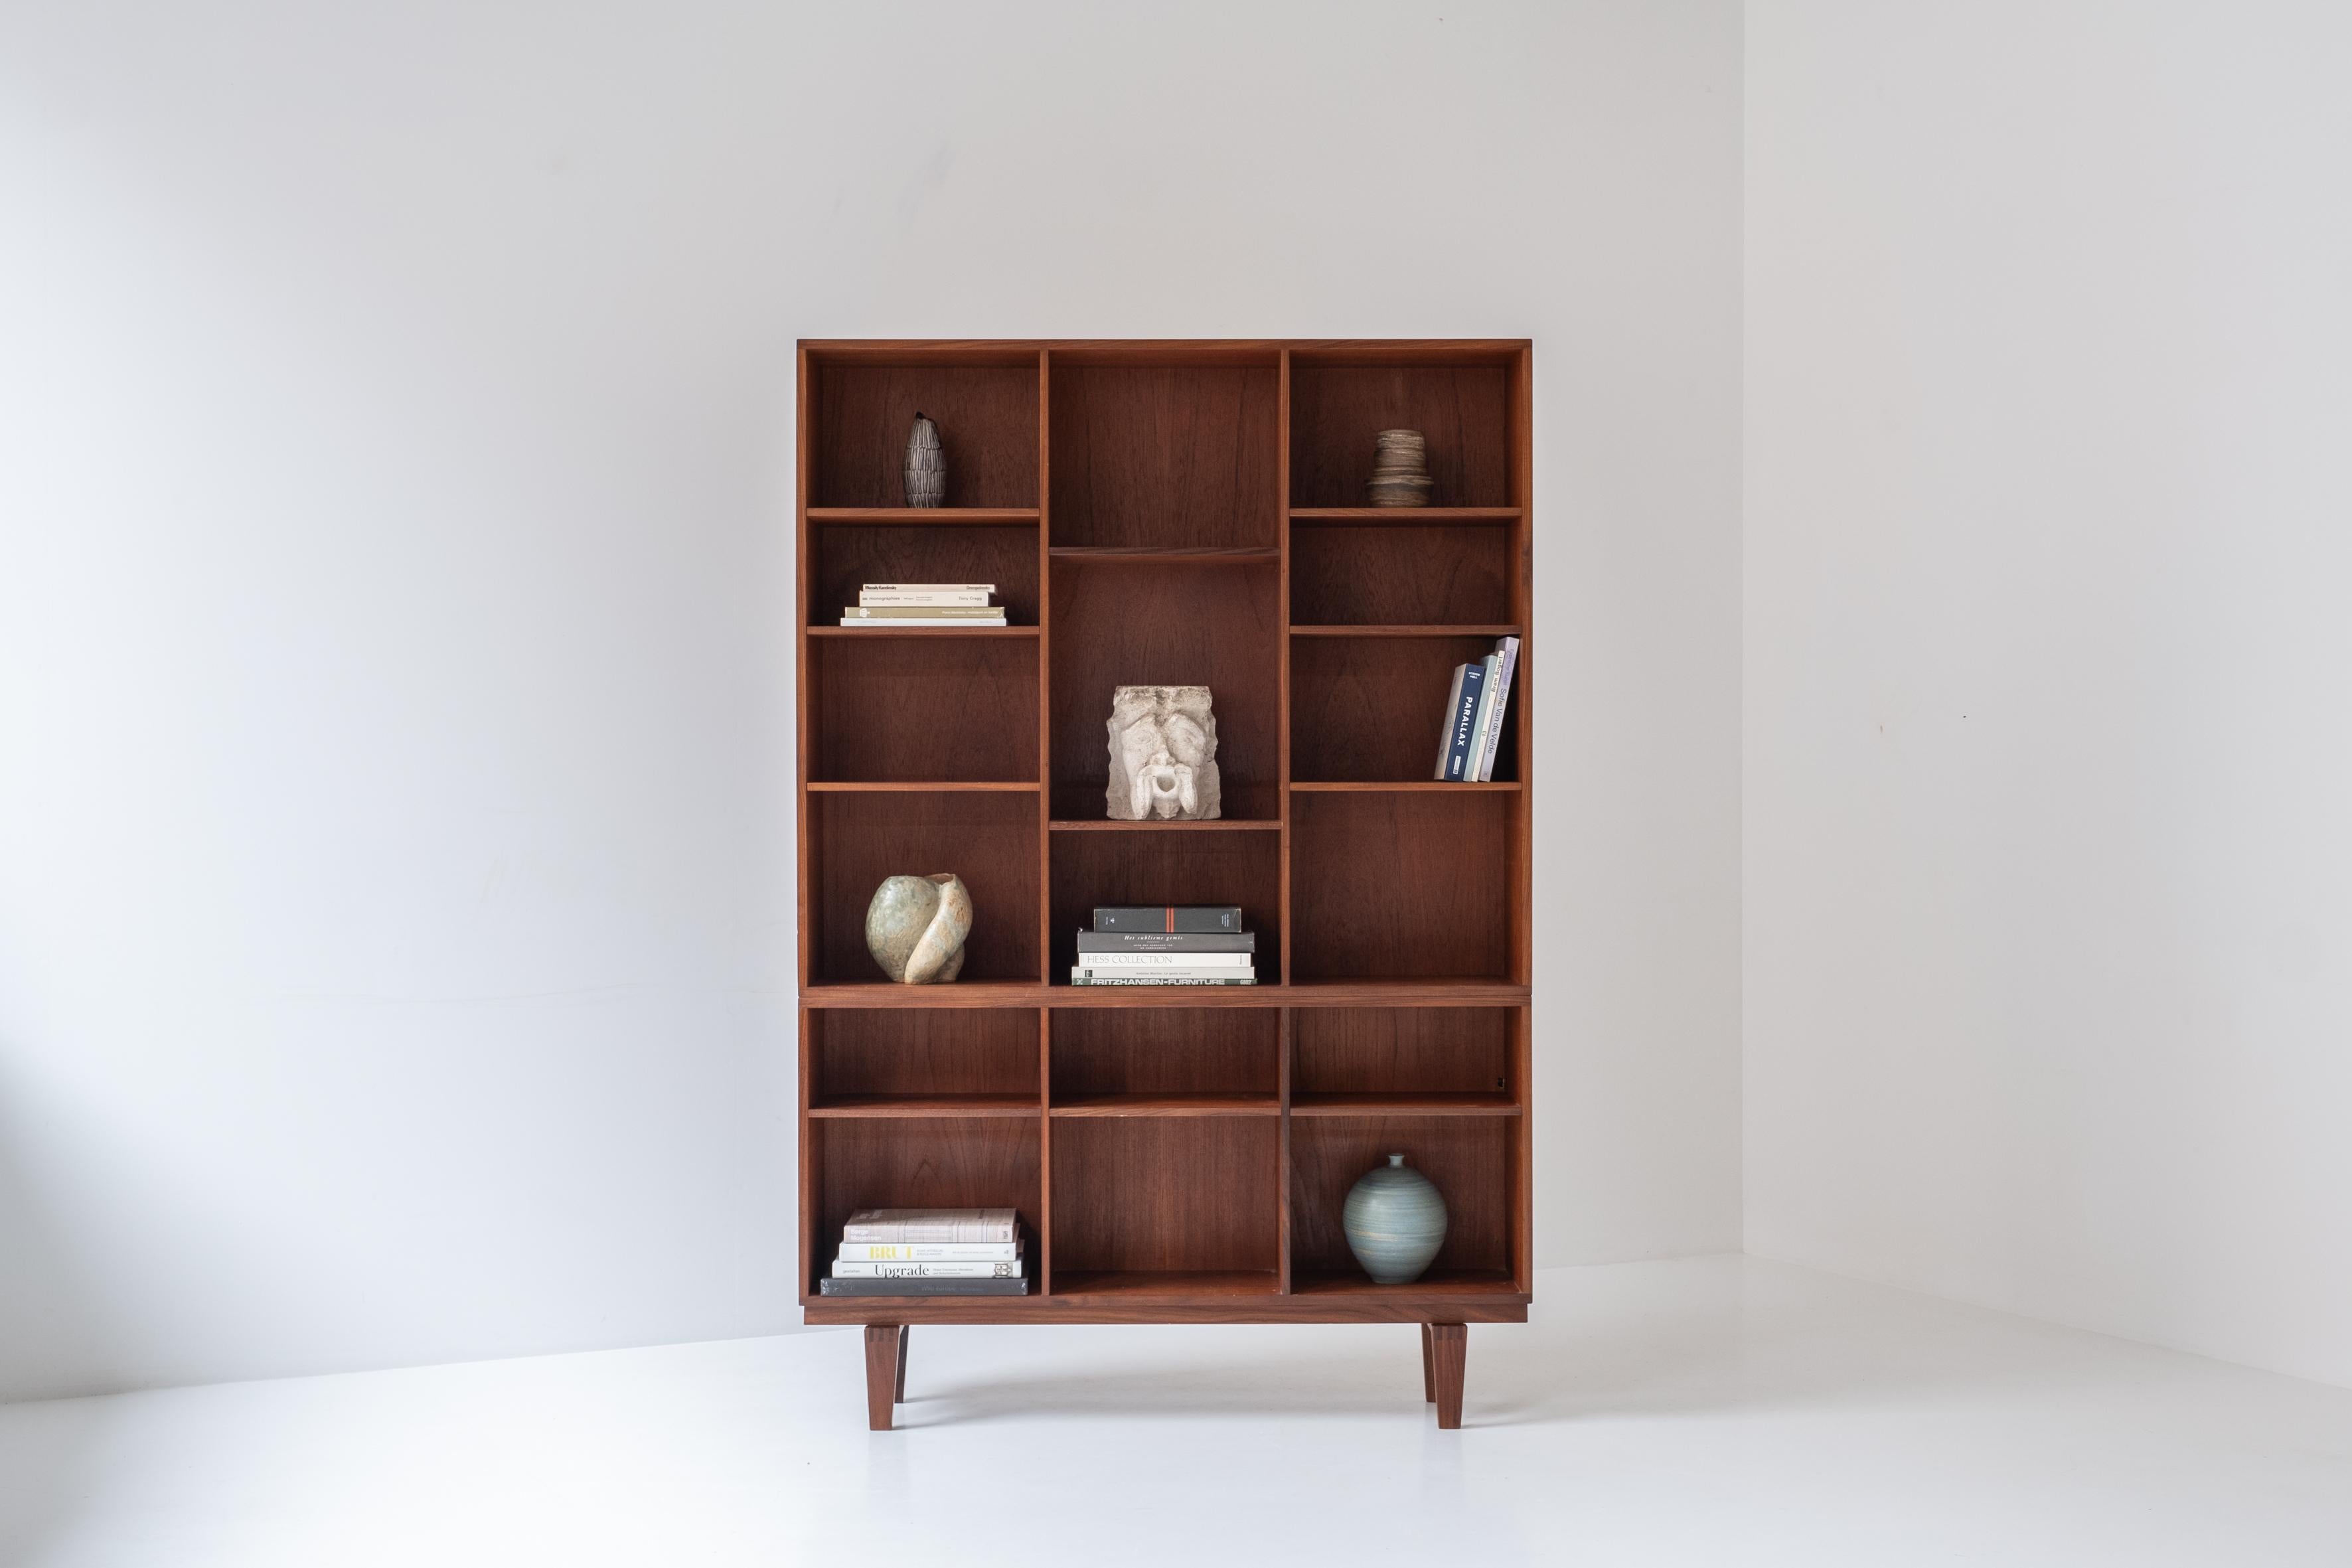 Rare version of this bookcase by Peter Løvig Nielsen for Løvig, Denmark, 1960s. This cabinet is made out of teak and the shelves are adjustable in height. This unit consists of two individually pieces placed on each other. Presented in its original